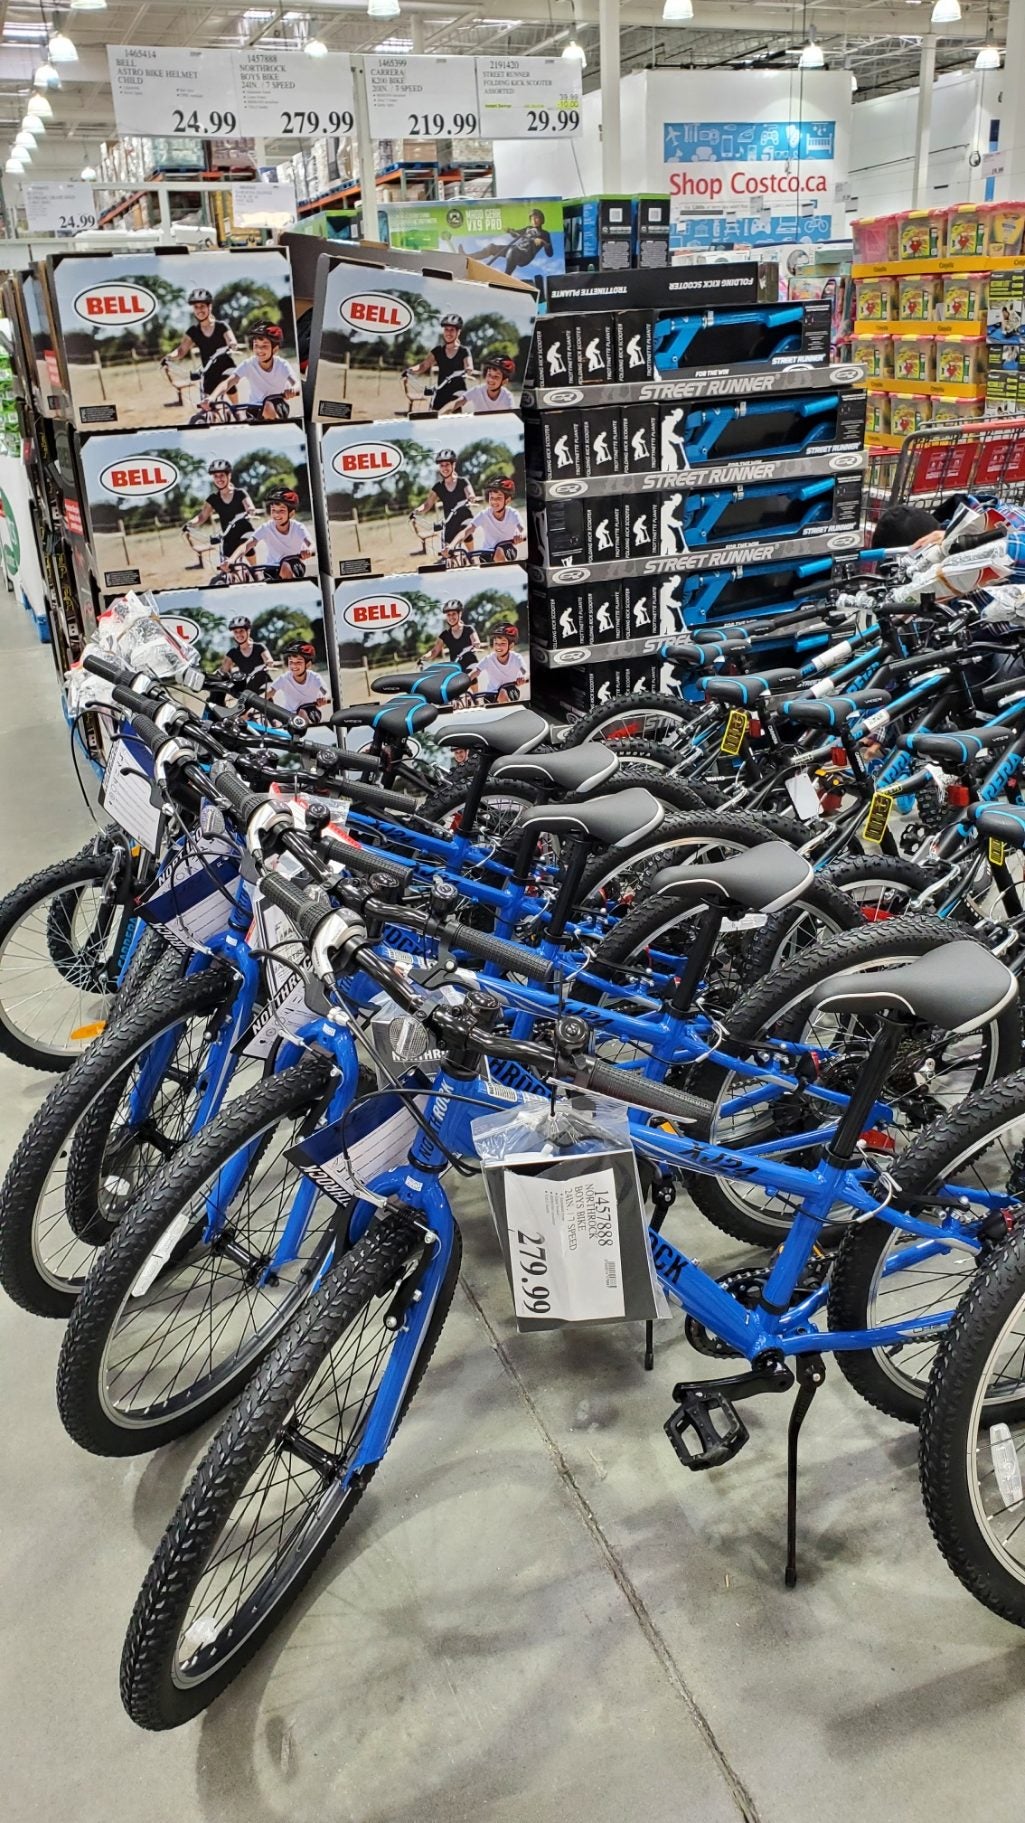 bicycles for sale at costco